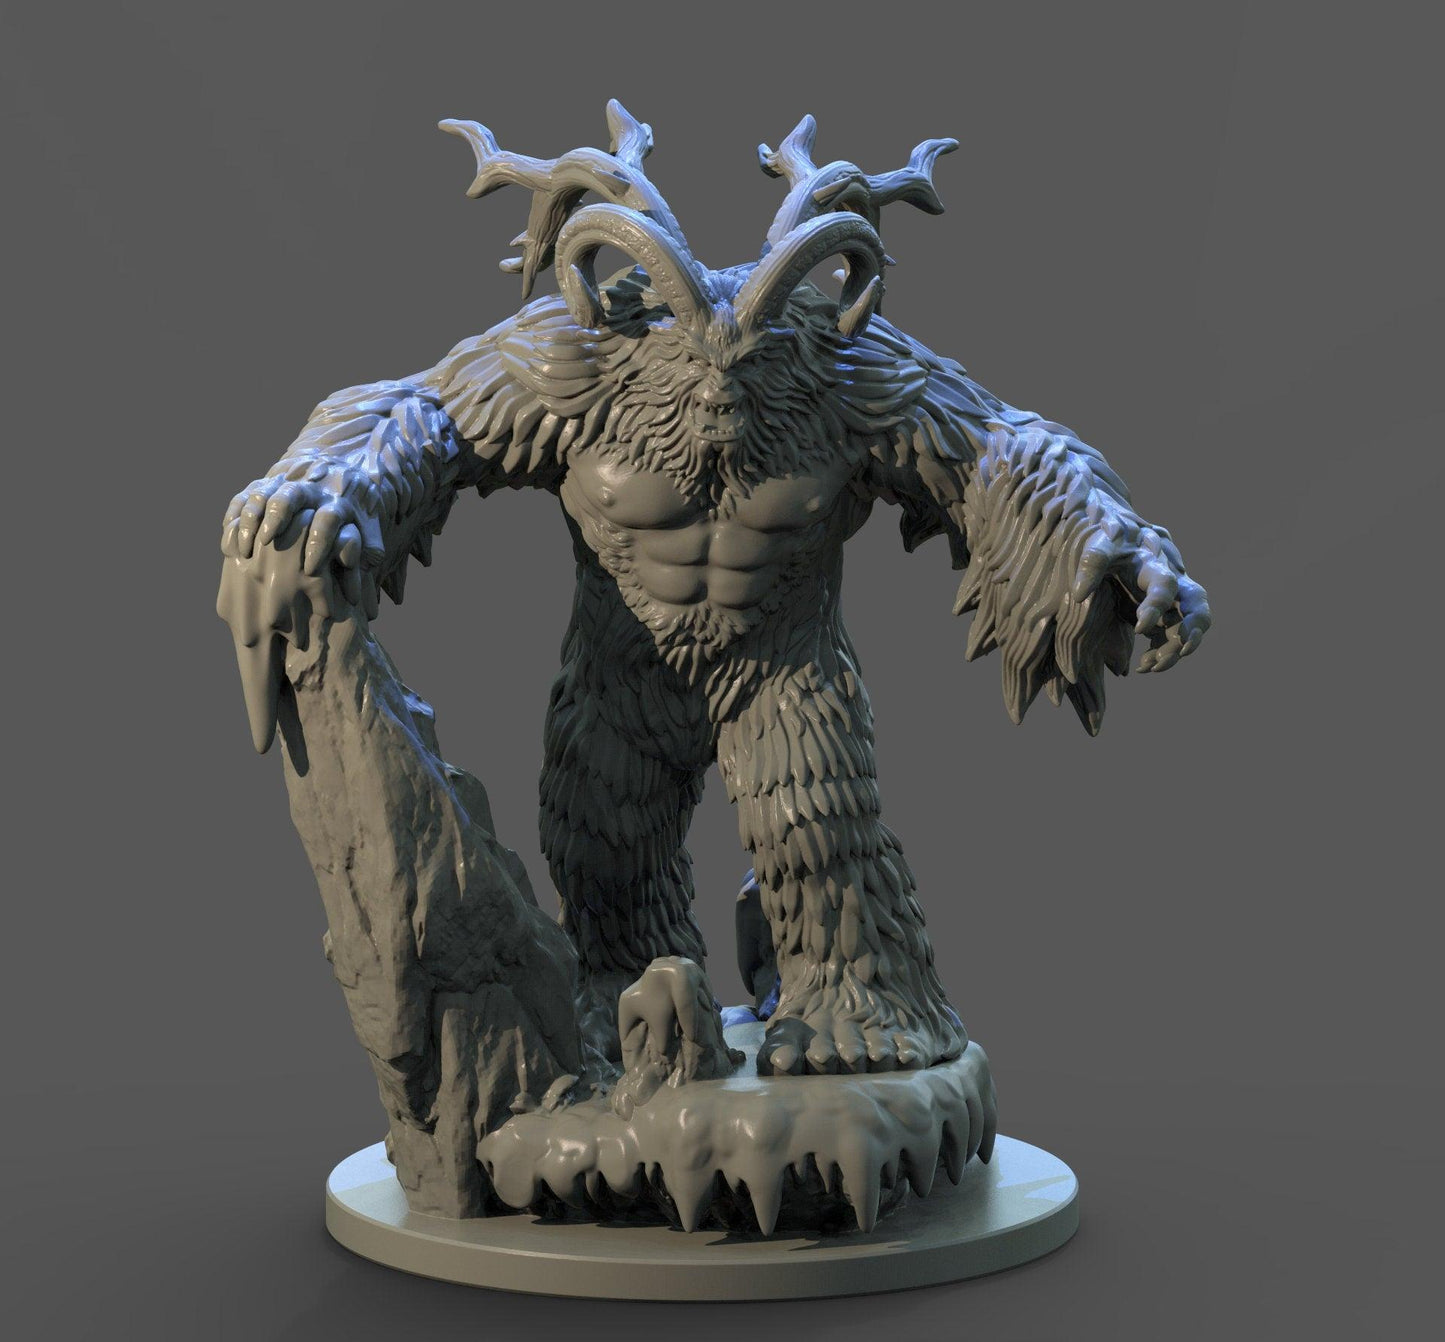 Karakoncolos Christmas Yeti Miniature | Festive Terrors for Tabletop Gaming | 32mm Scale - Plague Miniatures shop for DnD Miniatures